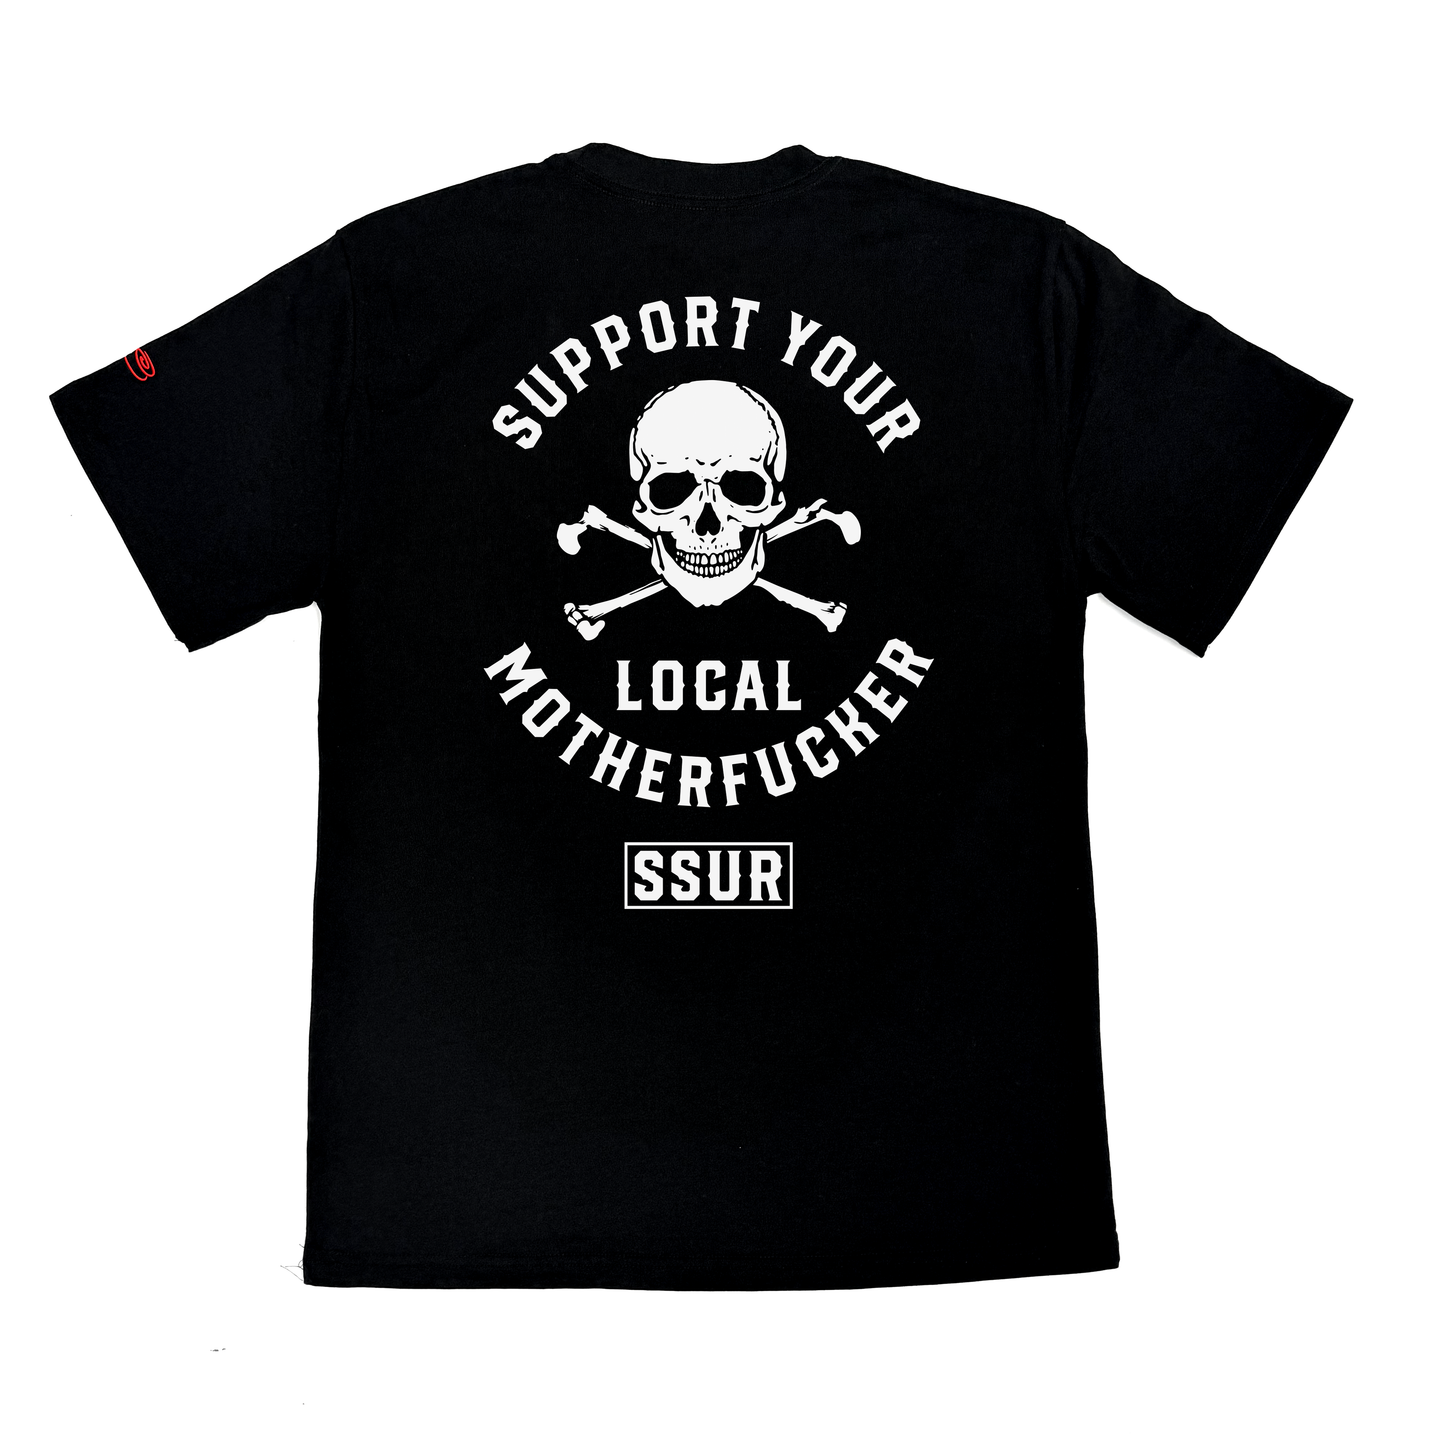 SUPPORT YOUR LOCAL T-SHIRT